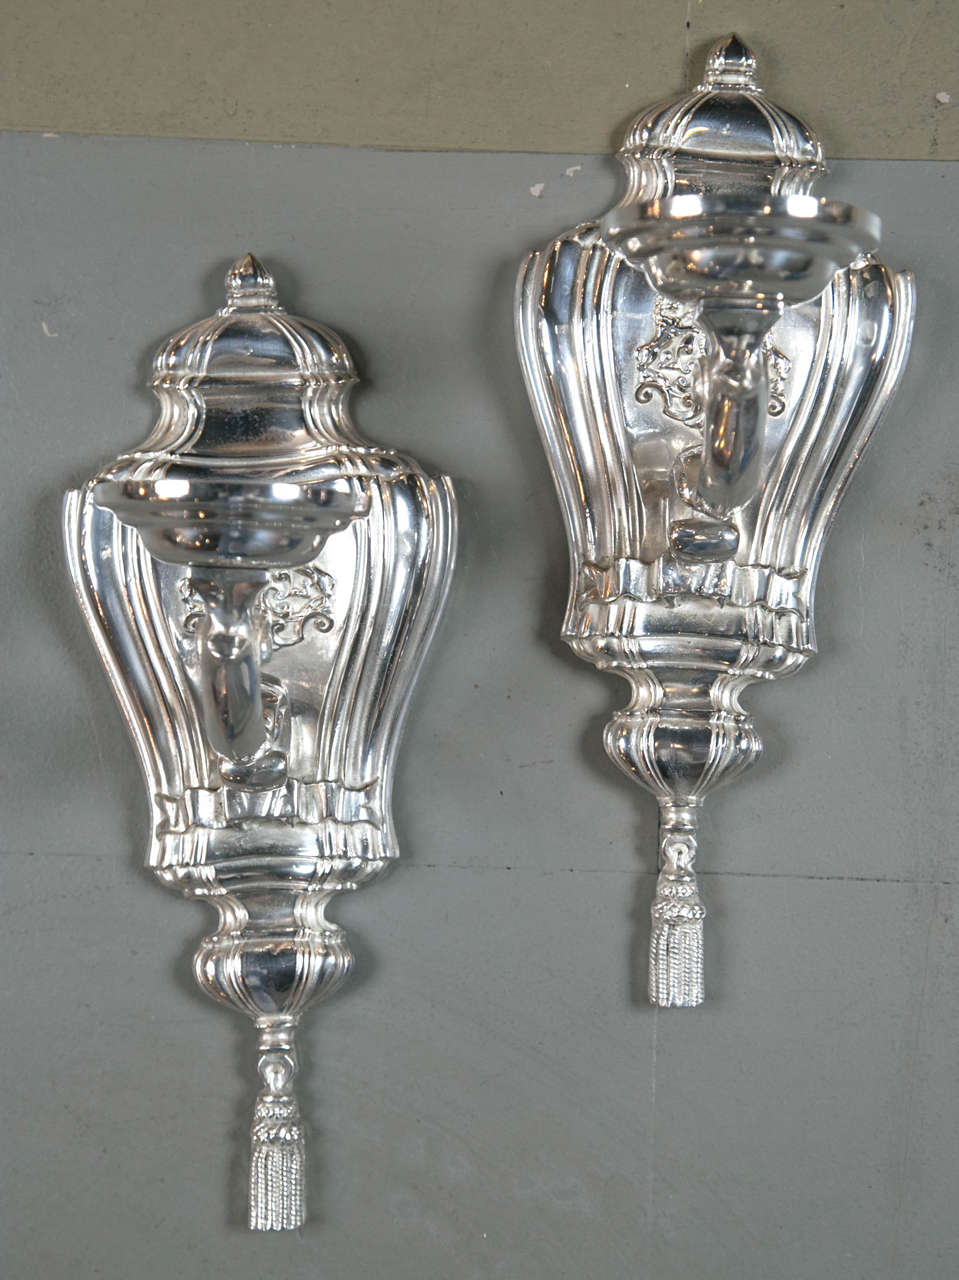 Pair of circa 1920s one-light sconces. All fixtures will be wired upon purchase. Eight available, priced per pair.